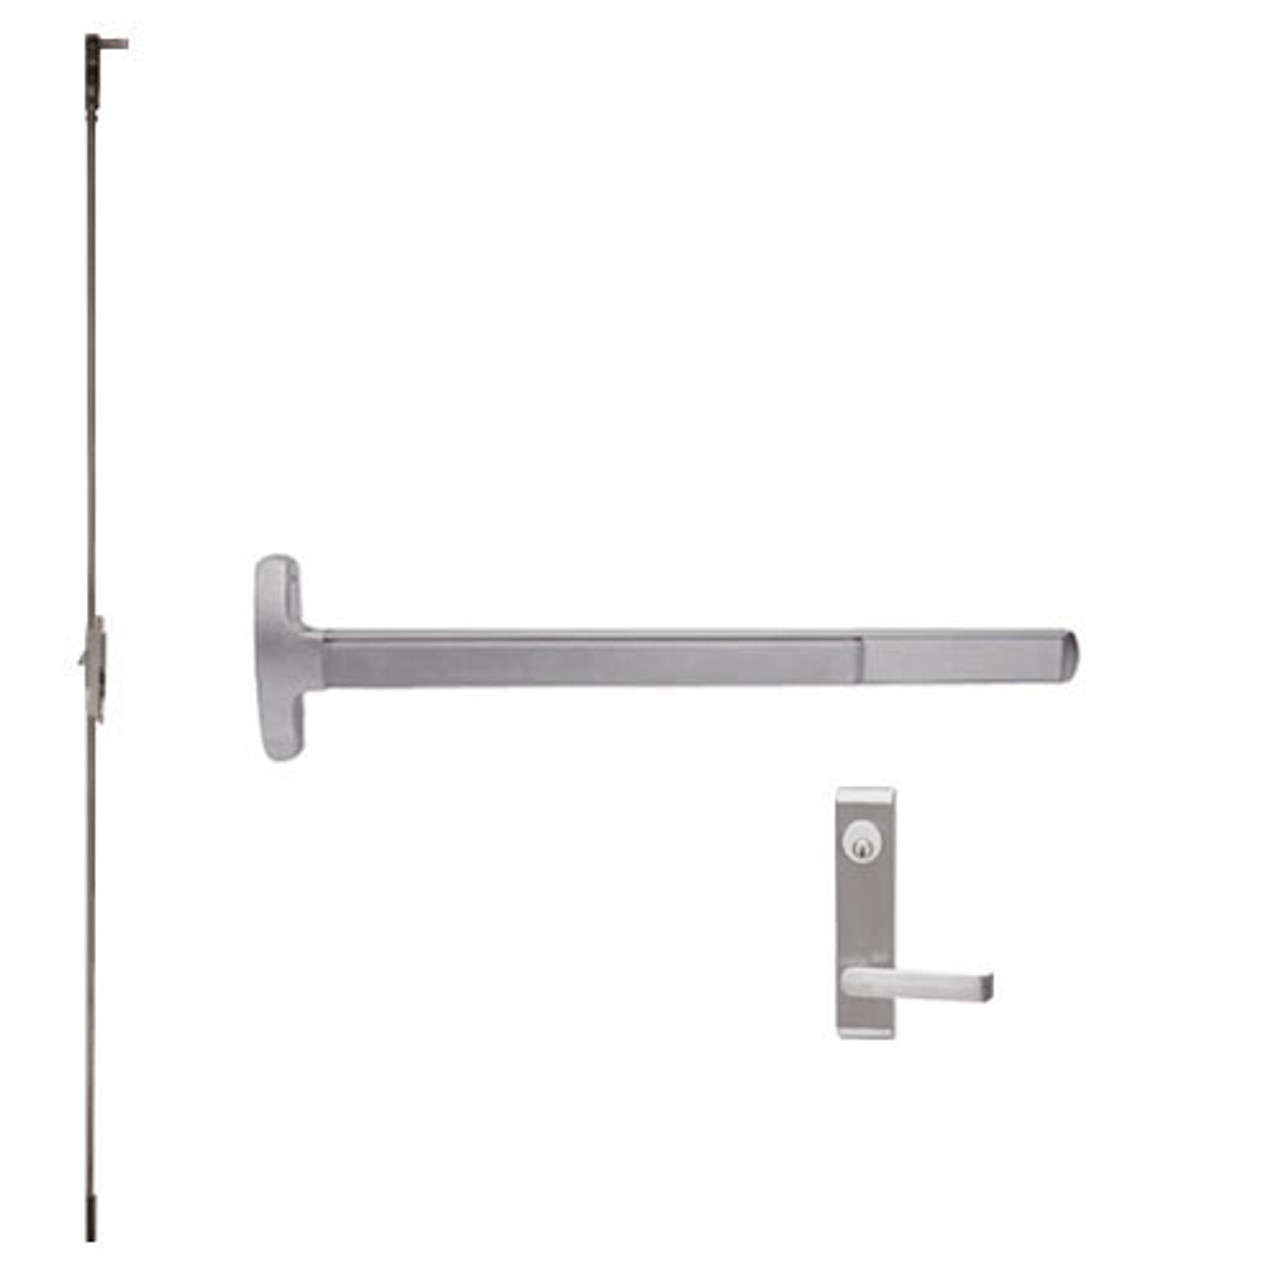 F-24-C-L-NL-DANE-US32D-3-RHR Falcon Exit Device in Satin Stainless Steel